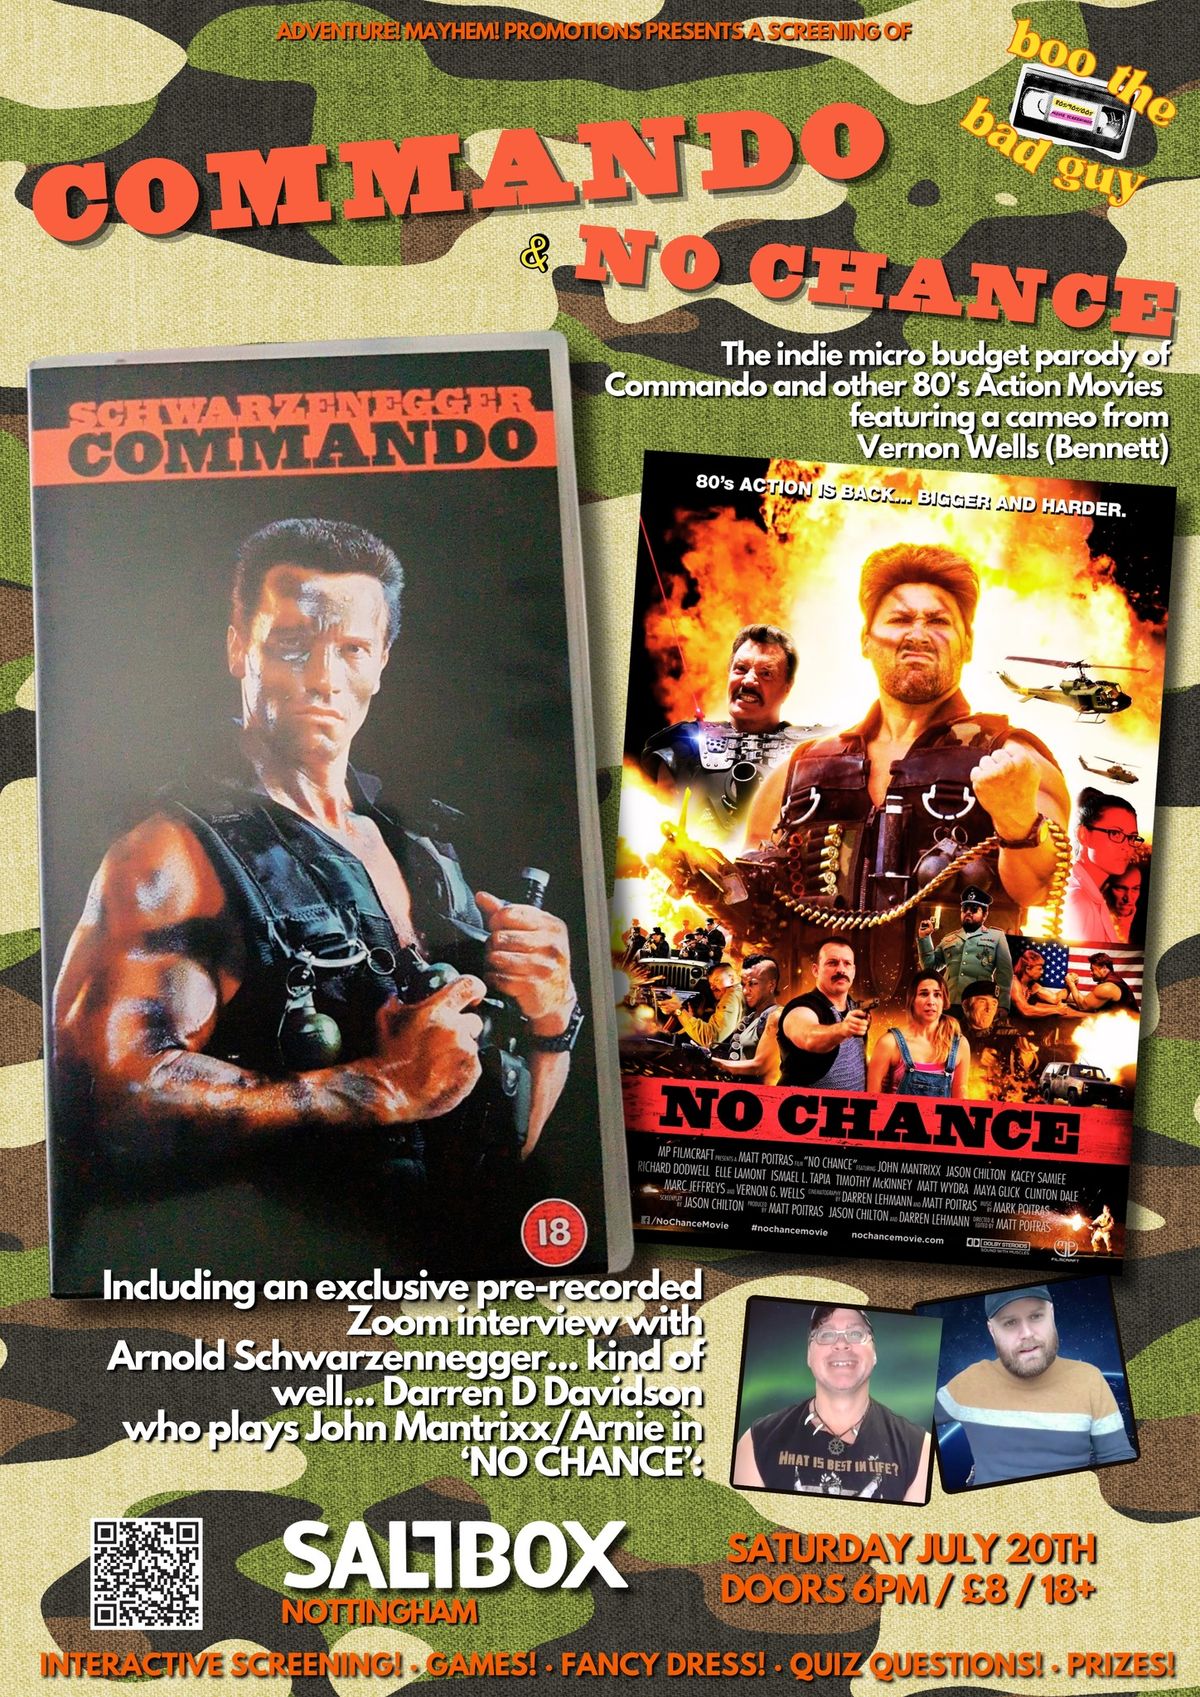 BTBG Presents: Commando & No Chance + exclusive Zoom interview with the star of No Chance